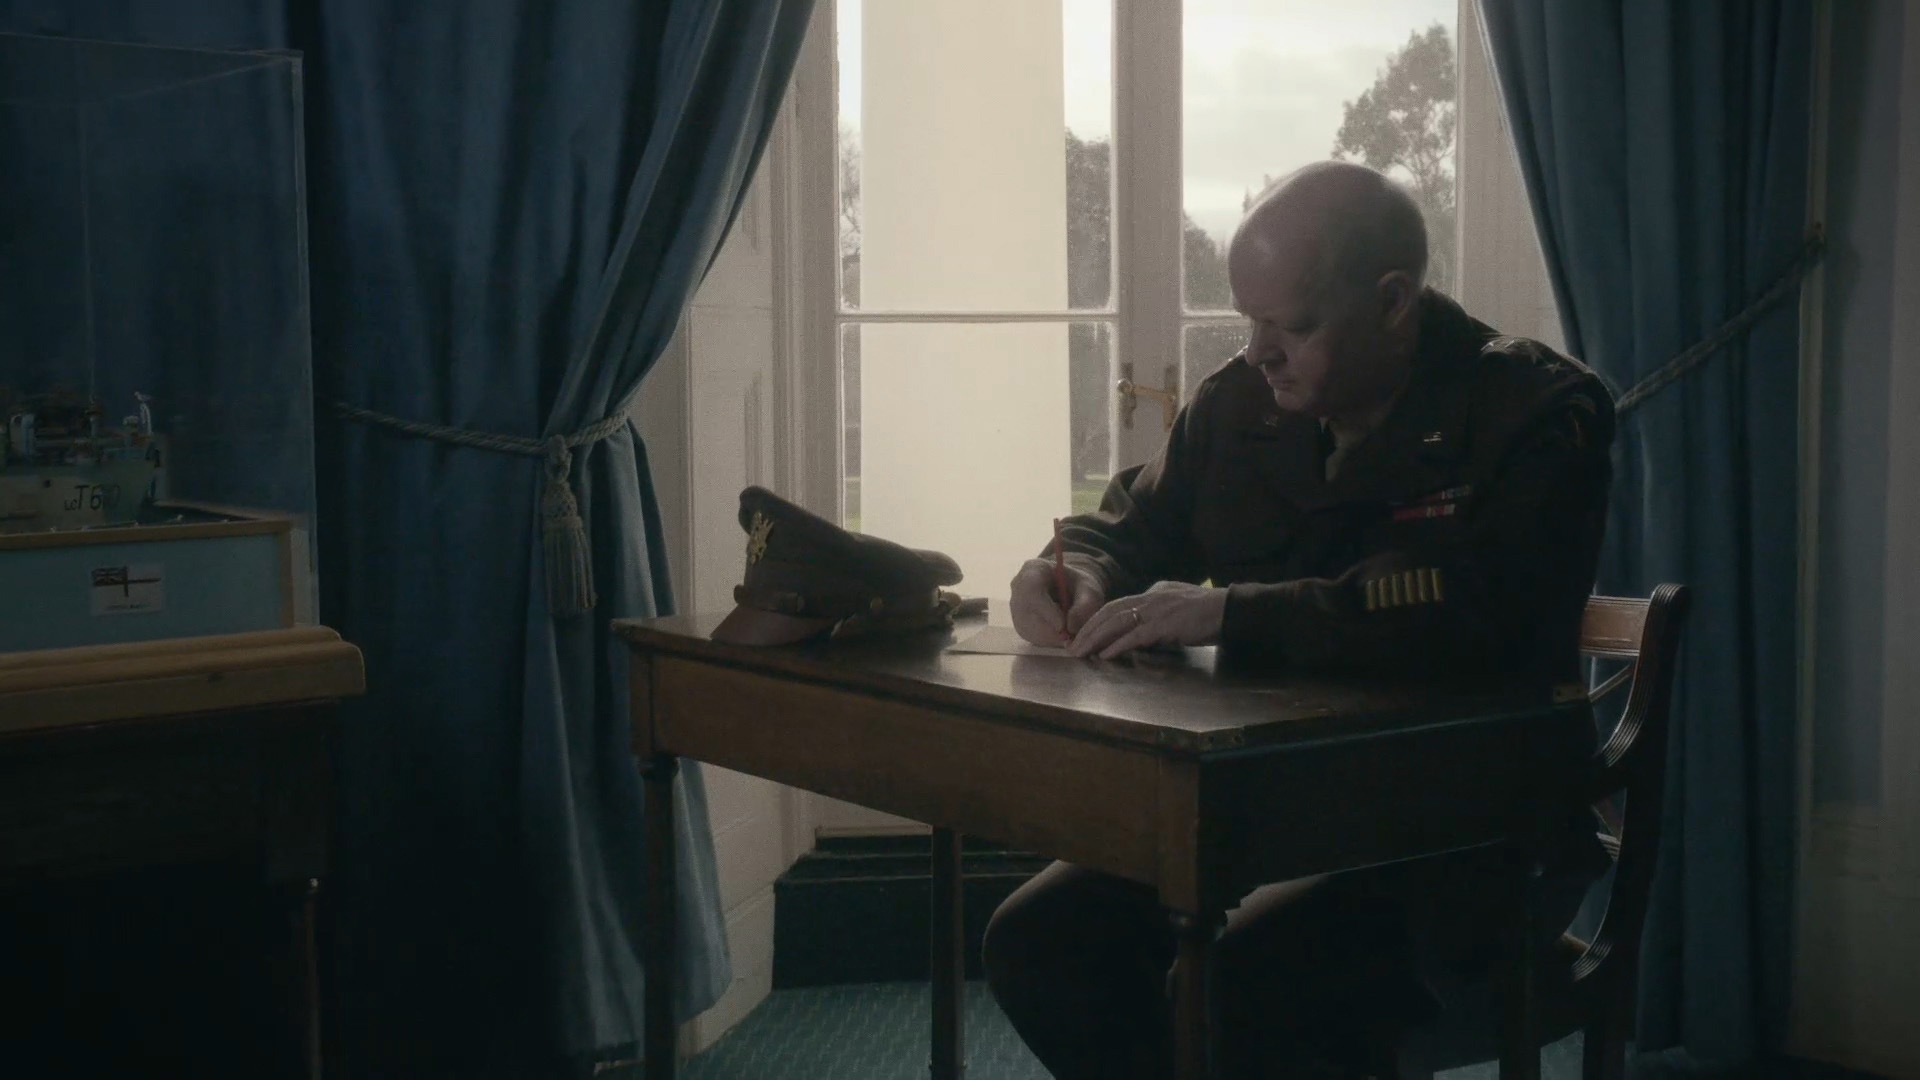 THE STORY OF THE D-DAY FORECAST: THREE DAYS IN JUNE - Colin Wright as General Dwight Eisenhower